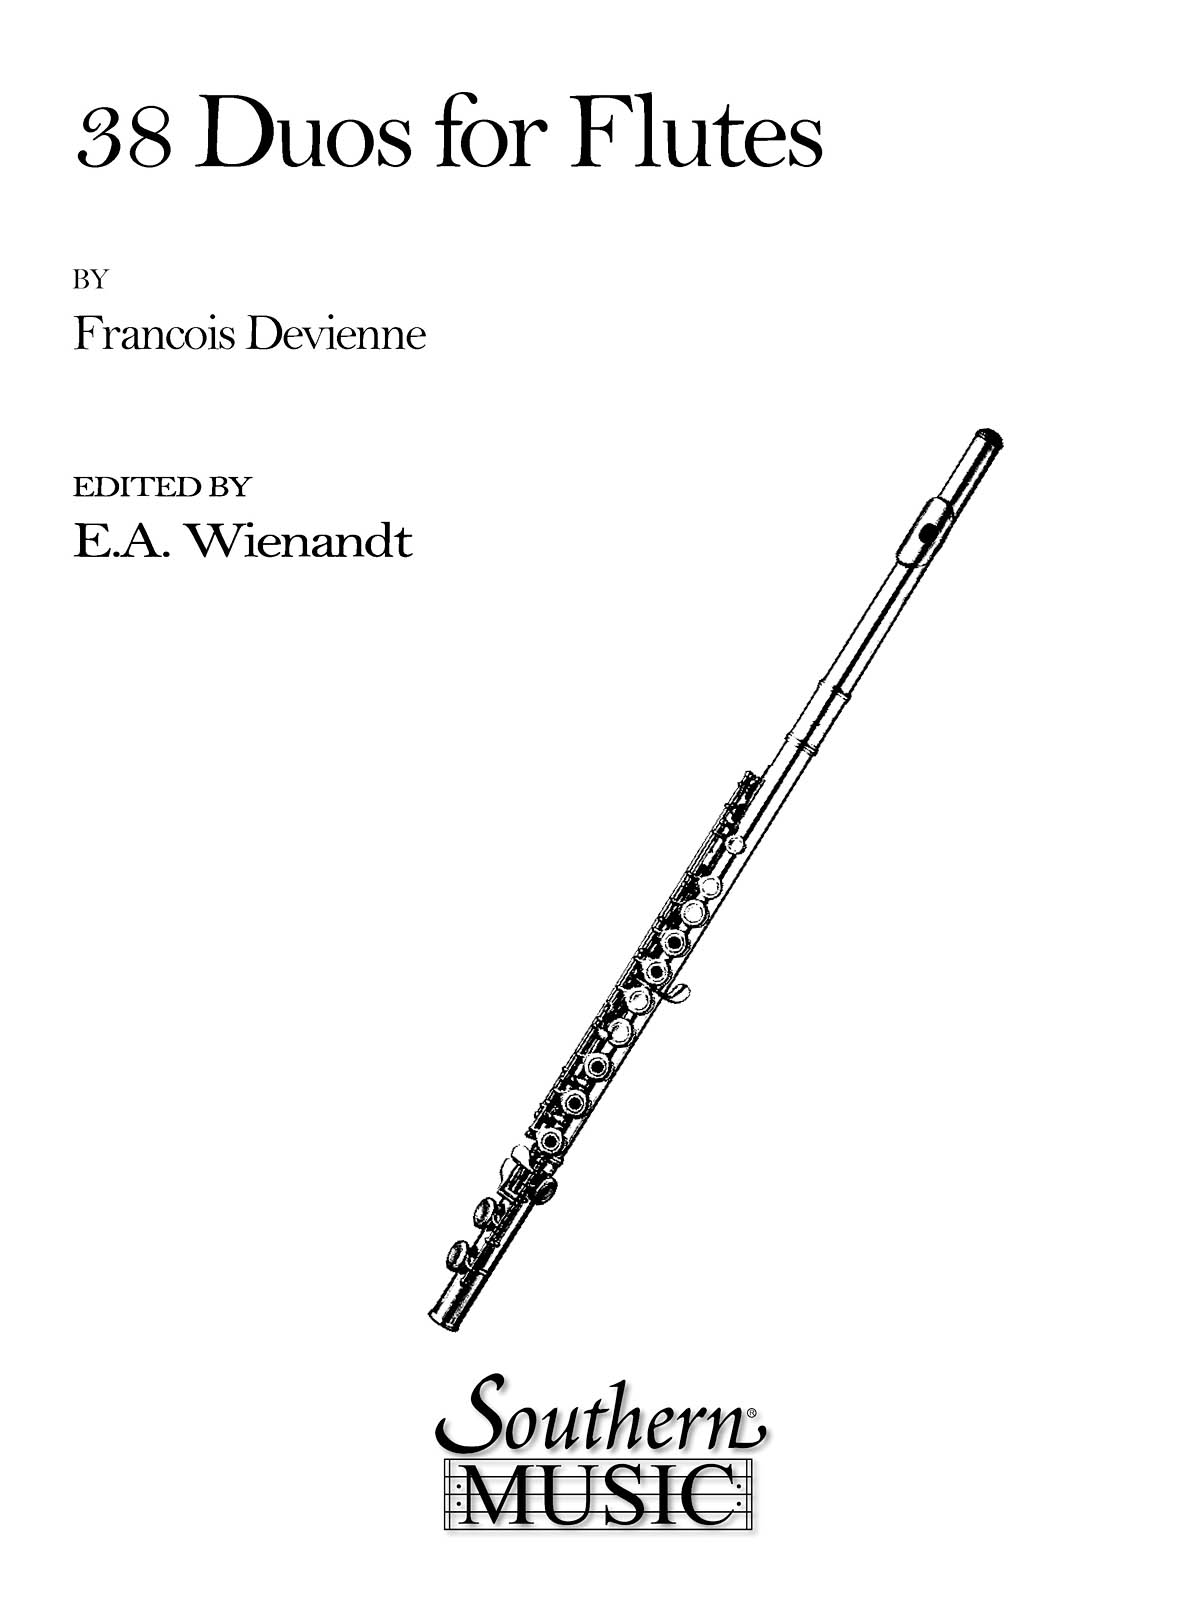 Thirty-Eight (38) Duos For Flutes